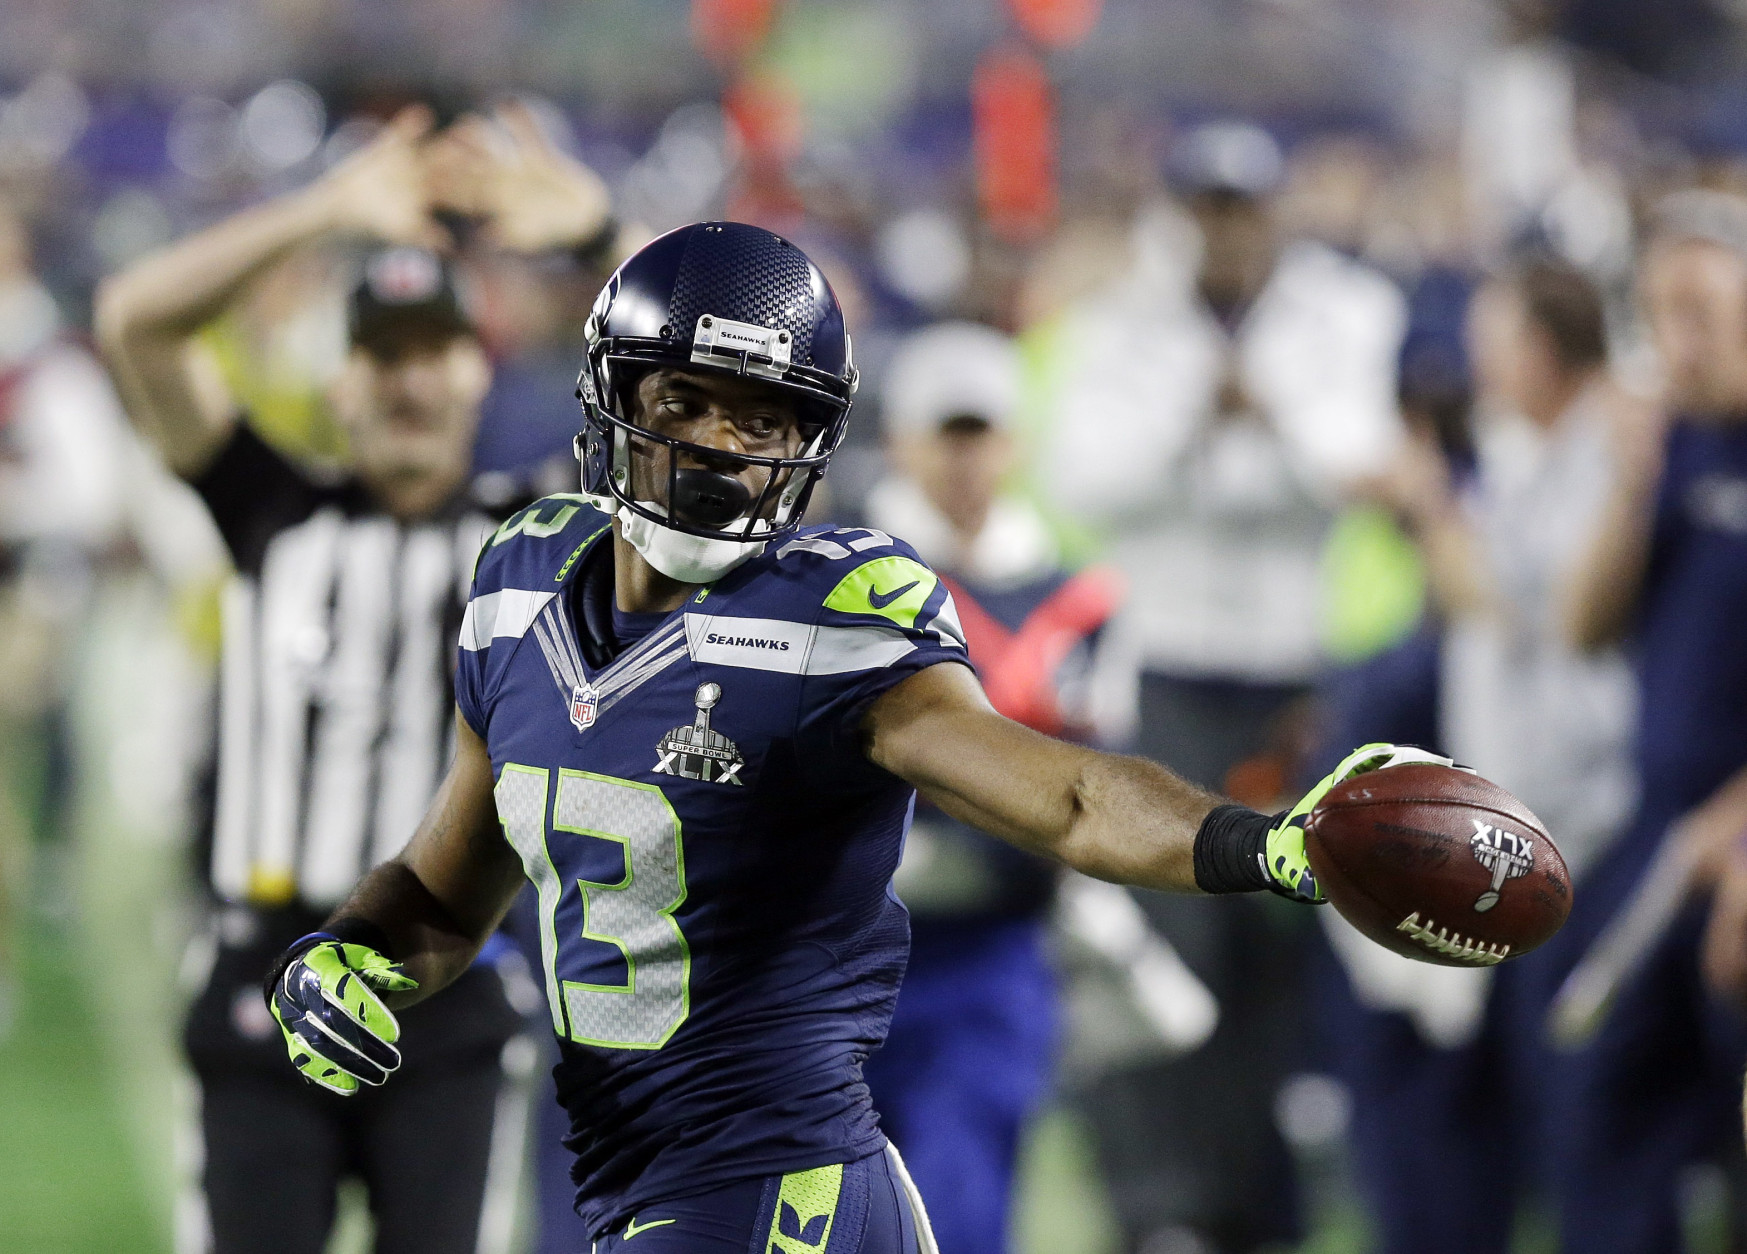 Seattle Seahawks wide receiver Chris Matthews (13) tosses the ball to the ref after he made a catch during the second half of NFL Super Bowl XLIX football game against the New England Patriots on Sunday, Feb. 1, 2015, in Glendale, Ariz. (AP Photo/Brynn Anderson)